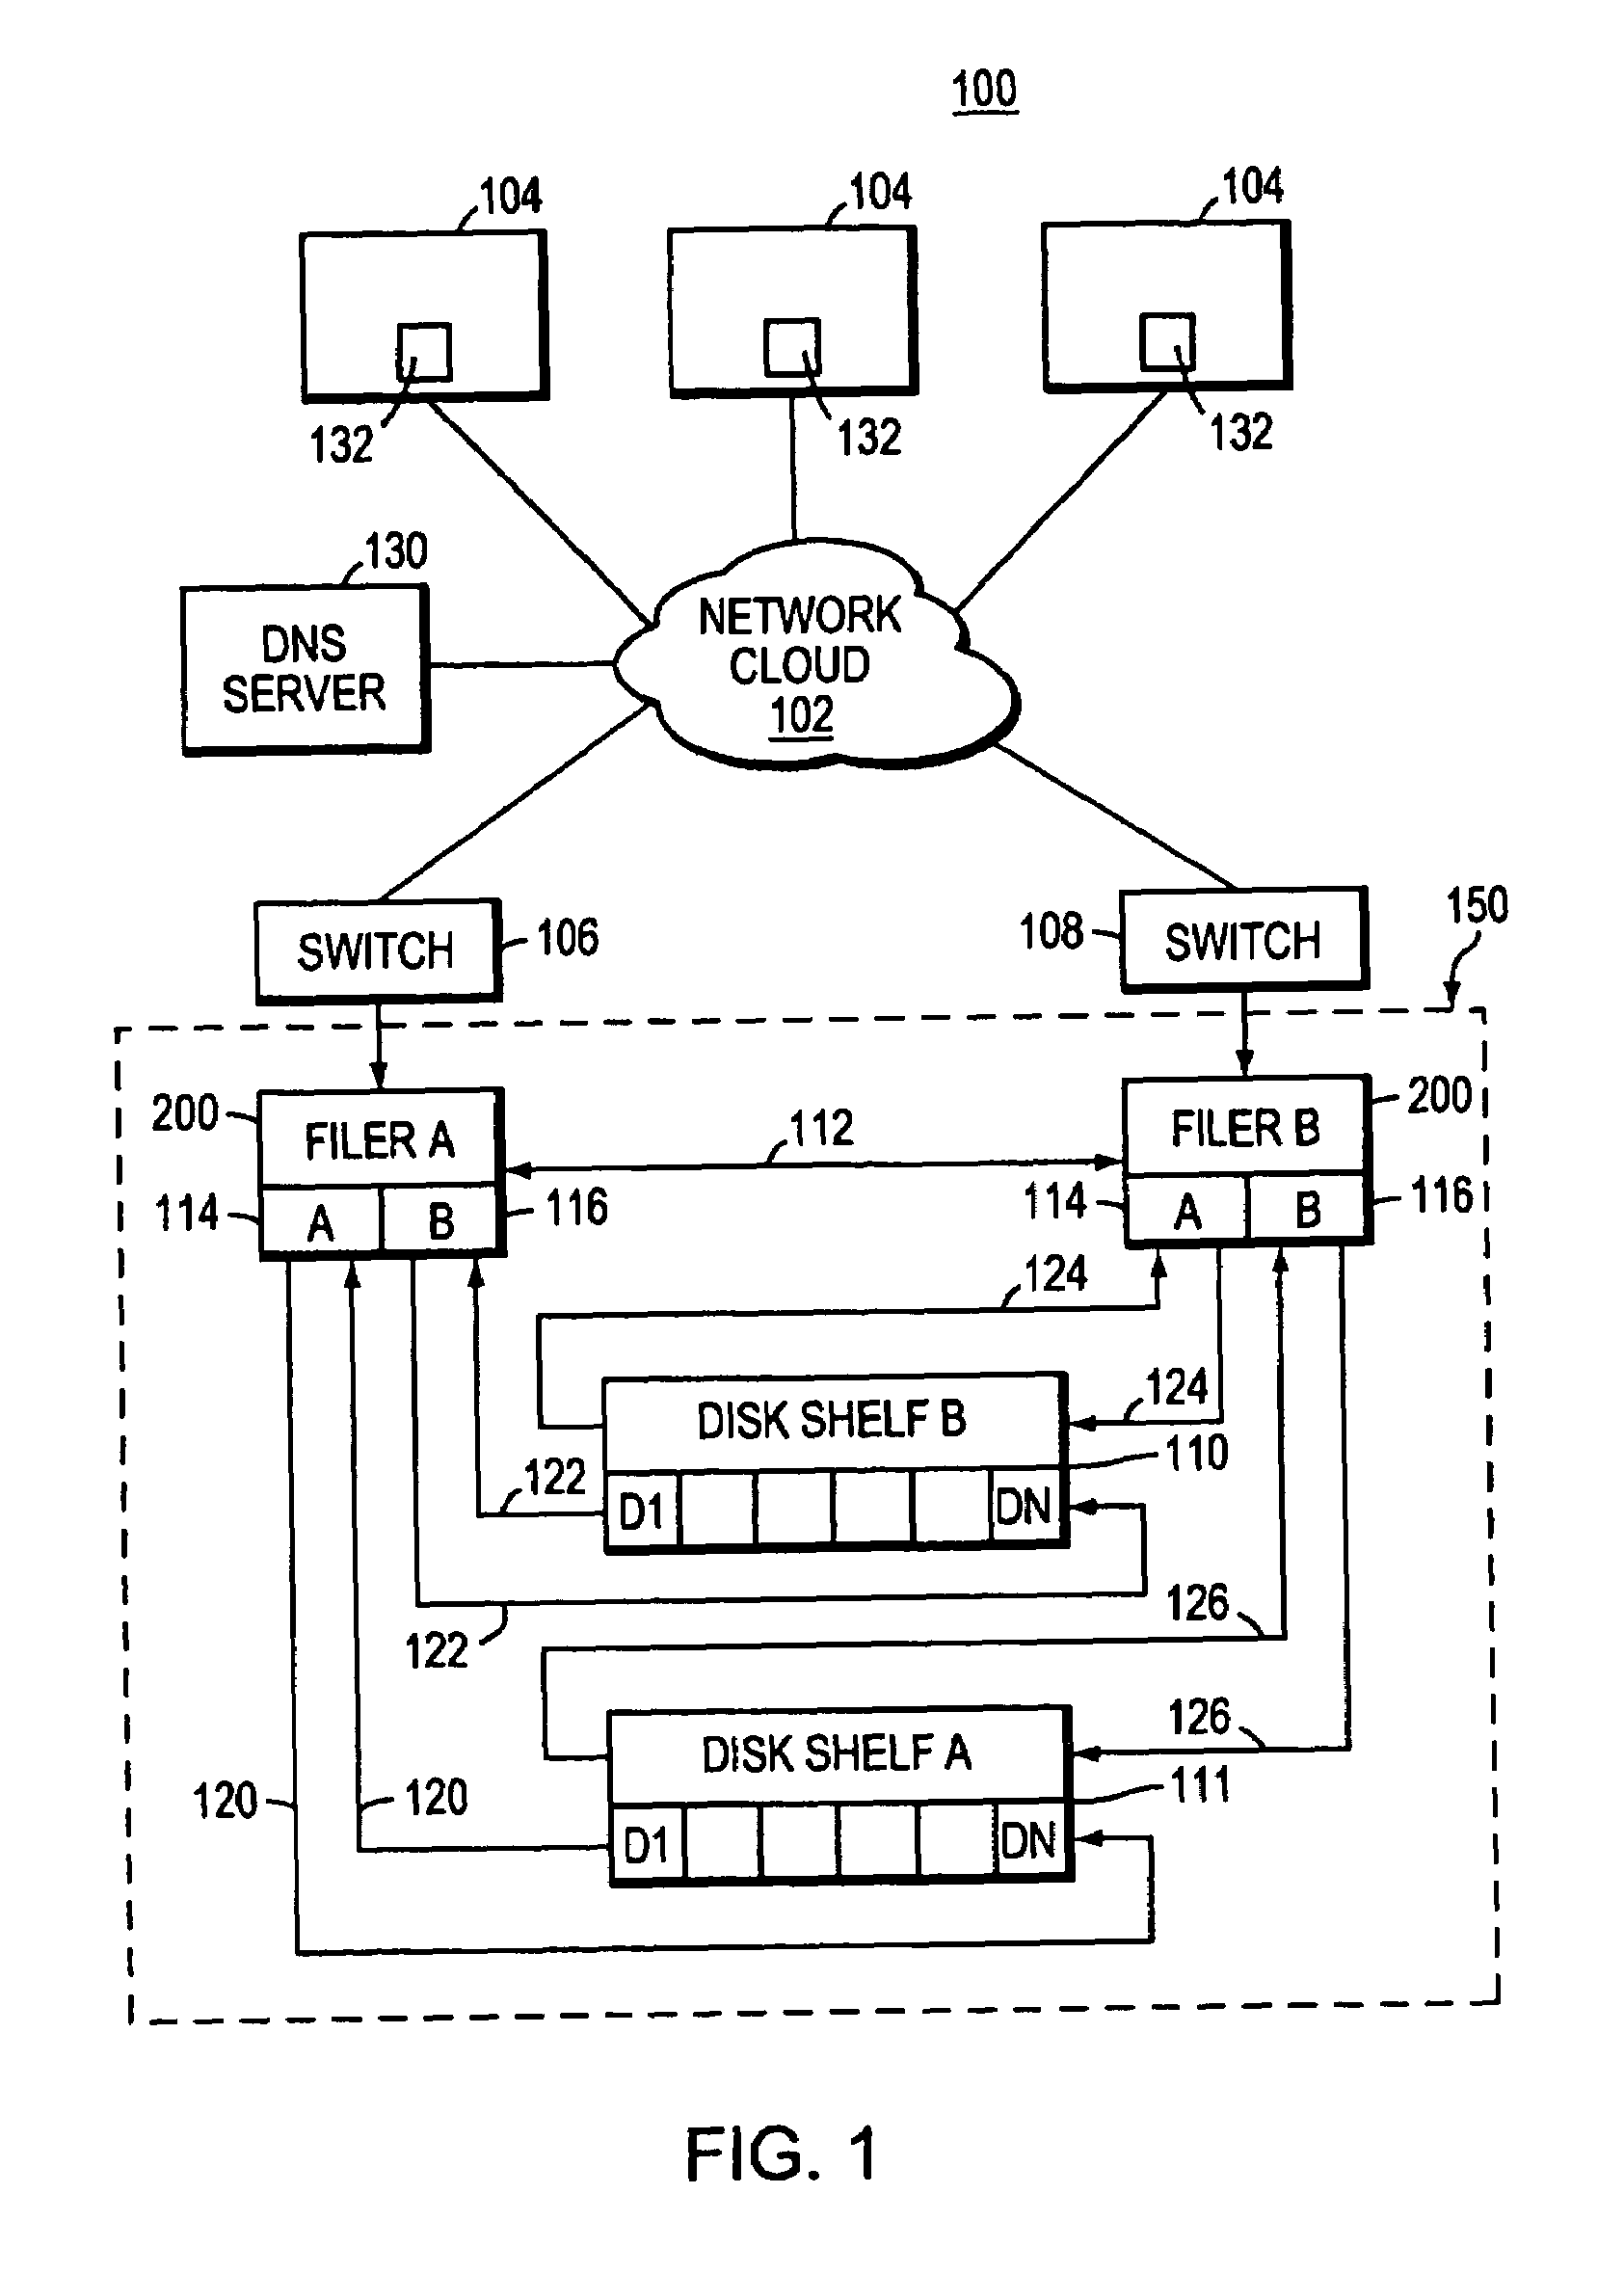 System and method for clustered failover without network support